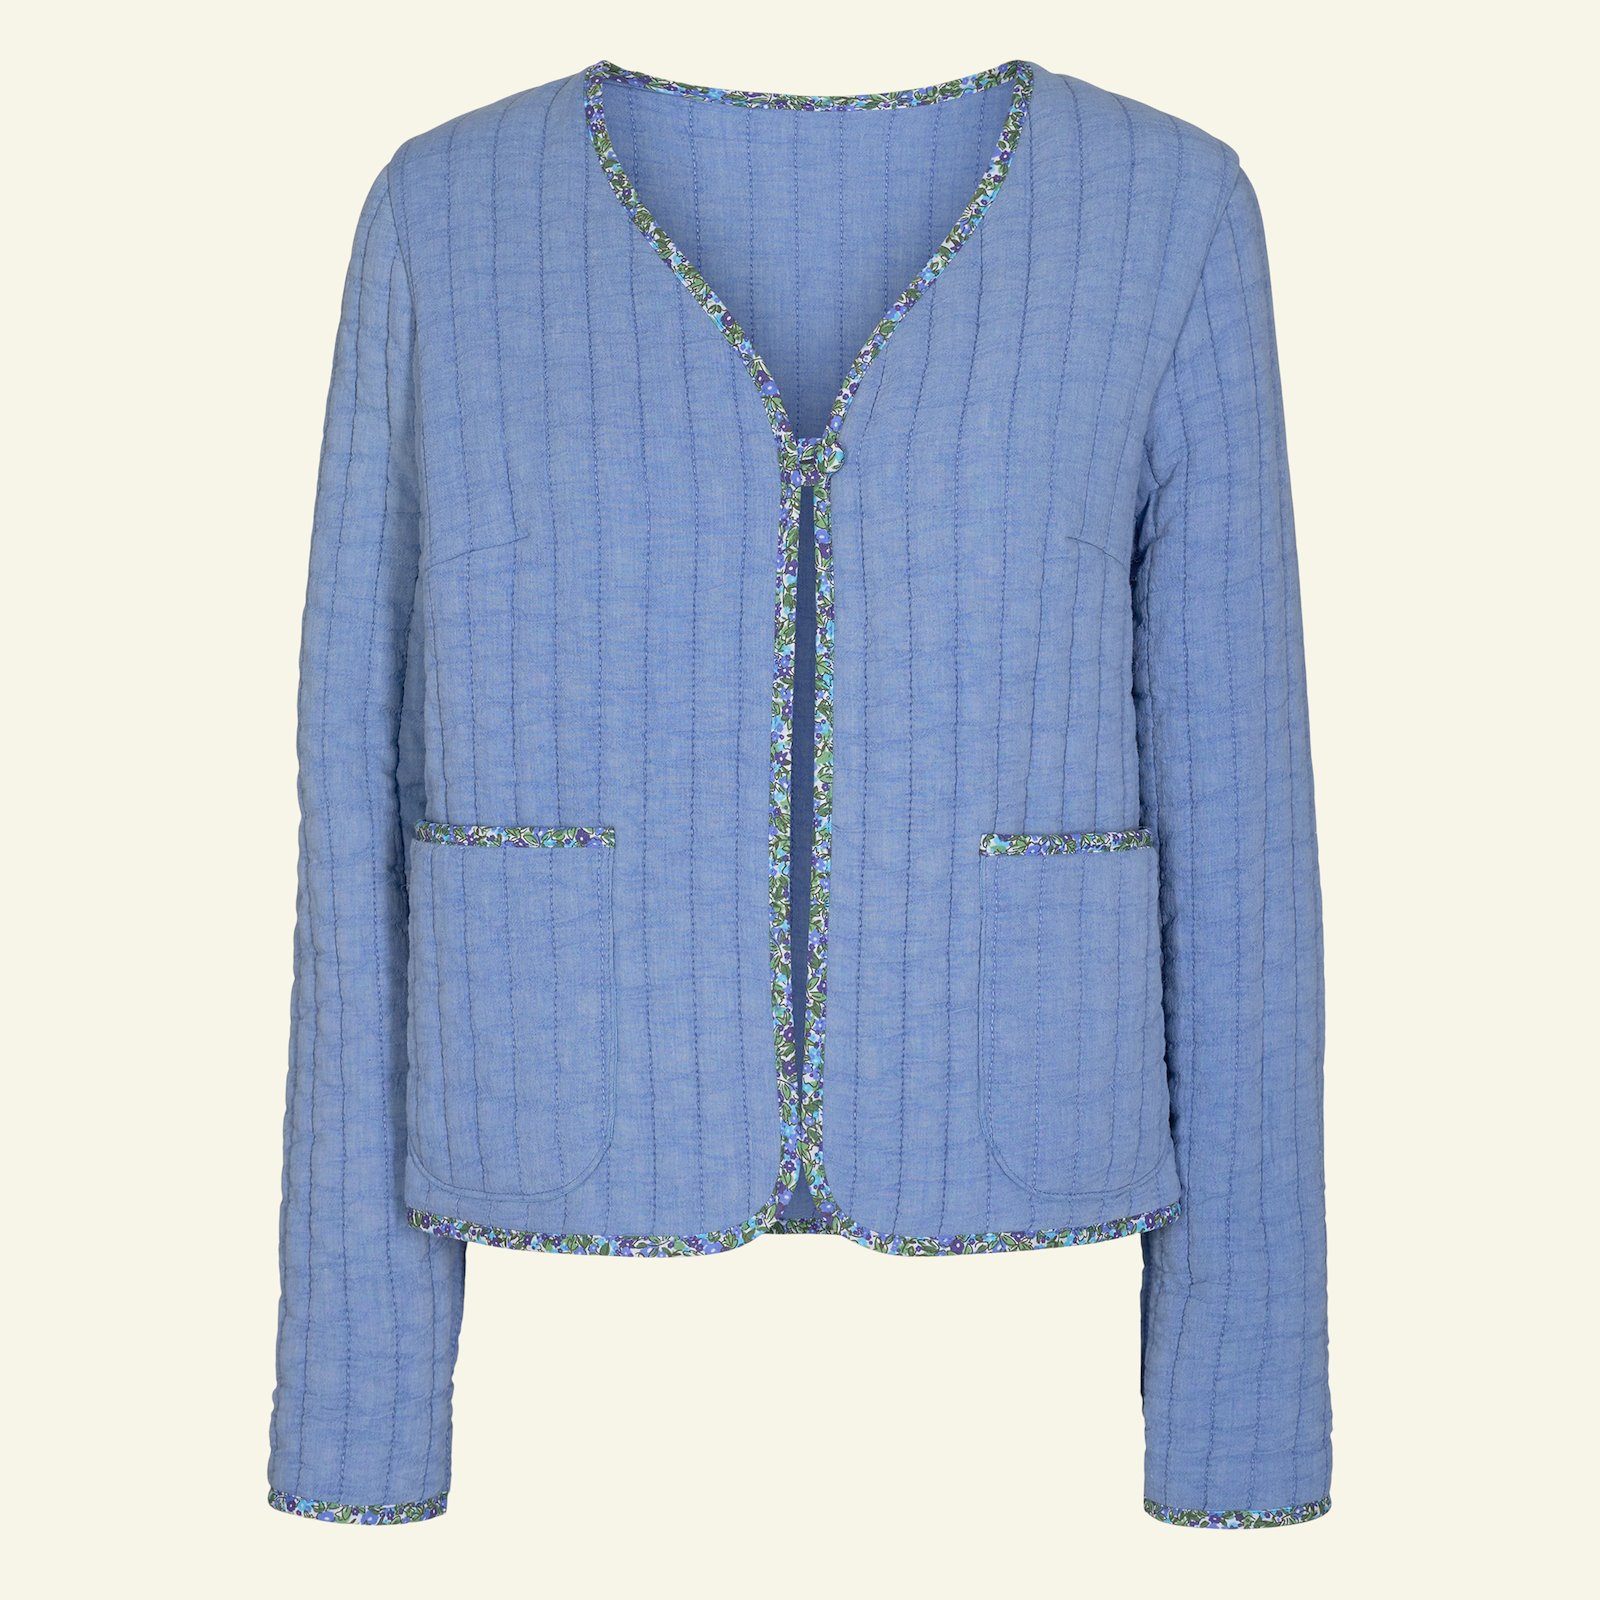 Quilted jacket and waistcoat, 40/12 p24047_920229_64110_43507_sskit